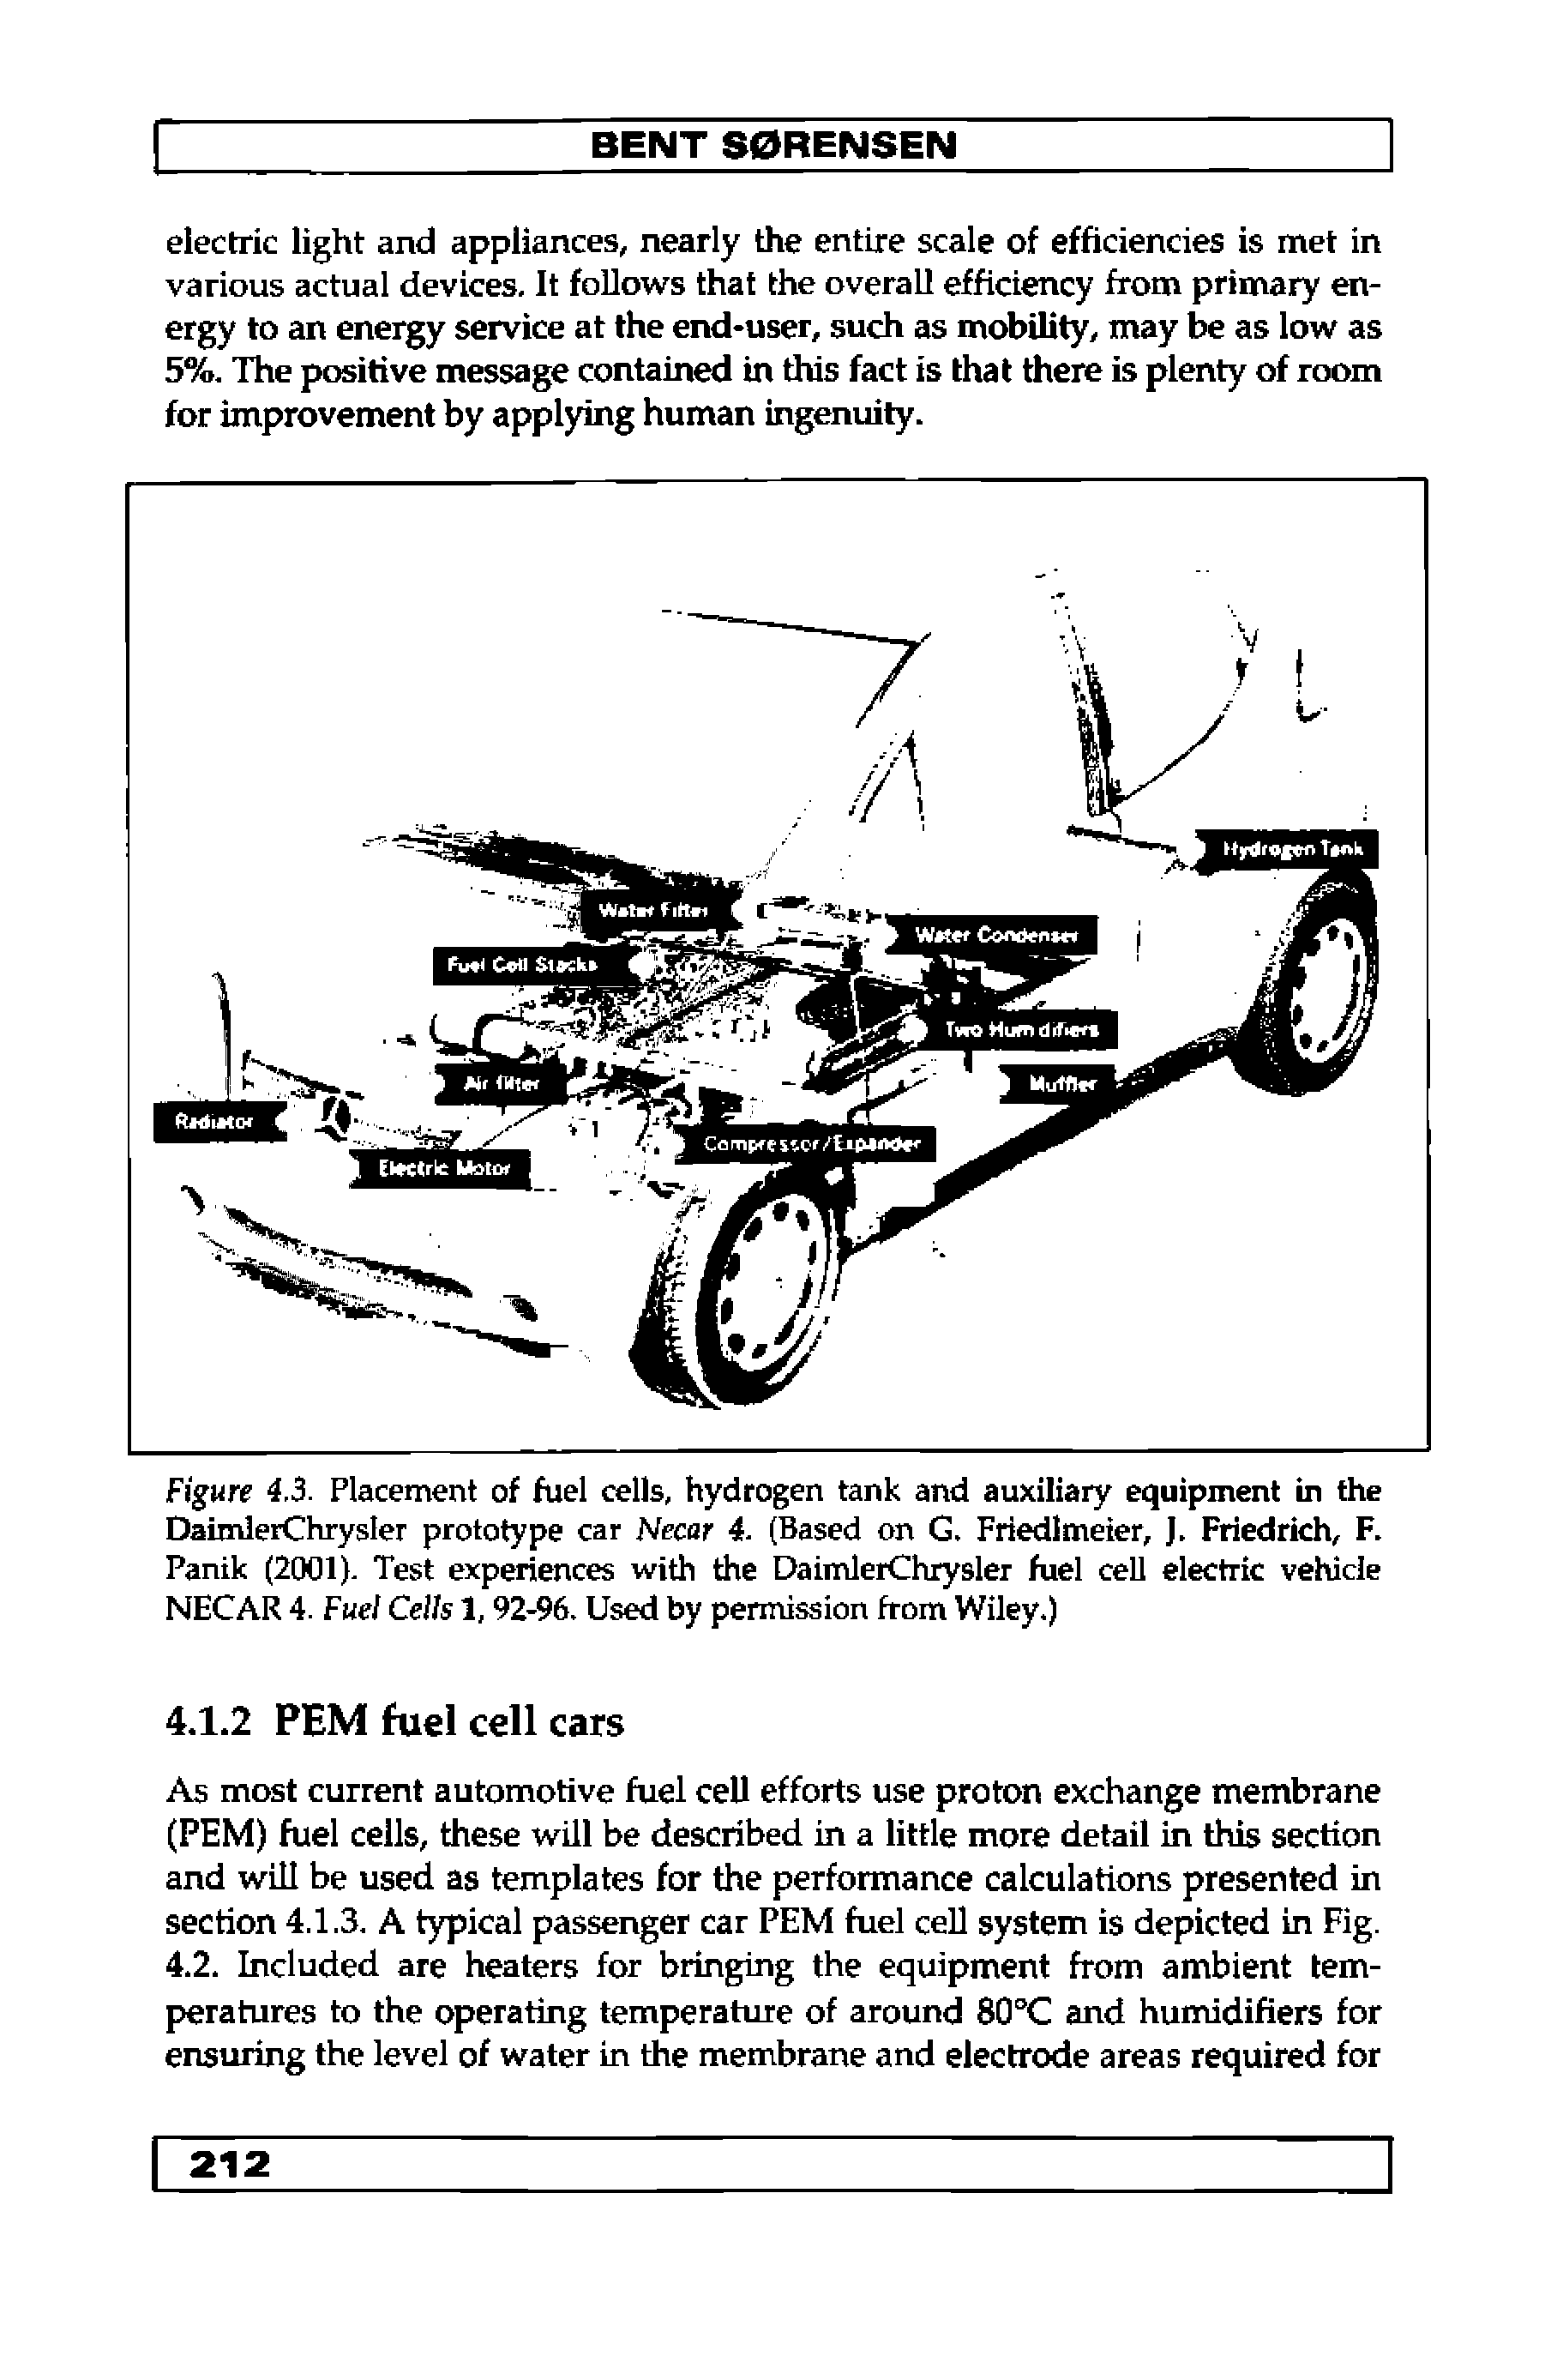 Figure 4.3. Placement of fuel cells, hydrogen tank and auxiliary equipment in the DaimlerChrysIer prototype car Necar 4. (Based on G. Friedlmeier, J. Friedrich, F. Panik (2001). Test experiences with the DaimlerChrysIer fuel cell electric vehicle NECAR 4. Fuel Cells 1,92-96, Used by permission from Wiley.)...